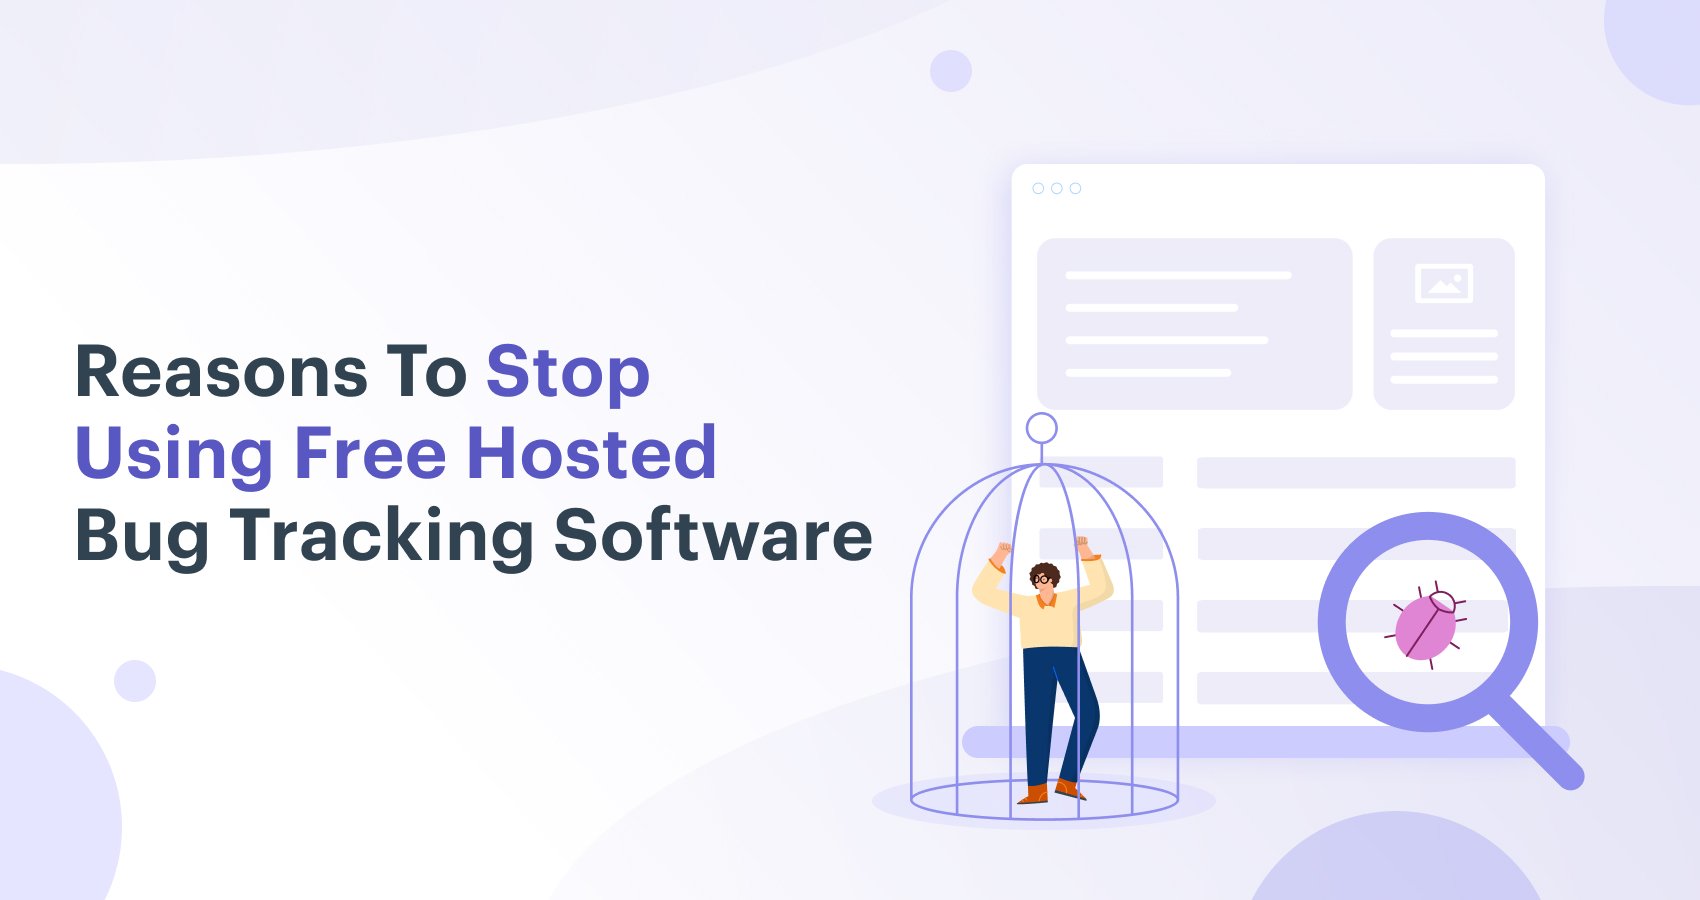 Reasons to stop using Free hosted bug tracking software